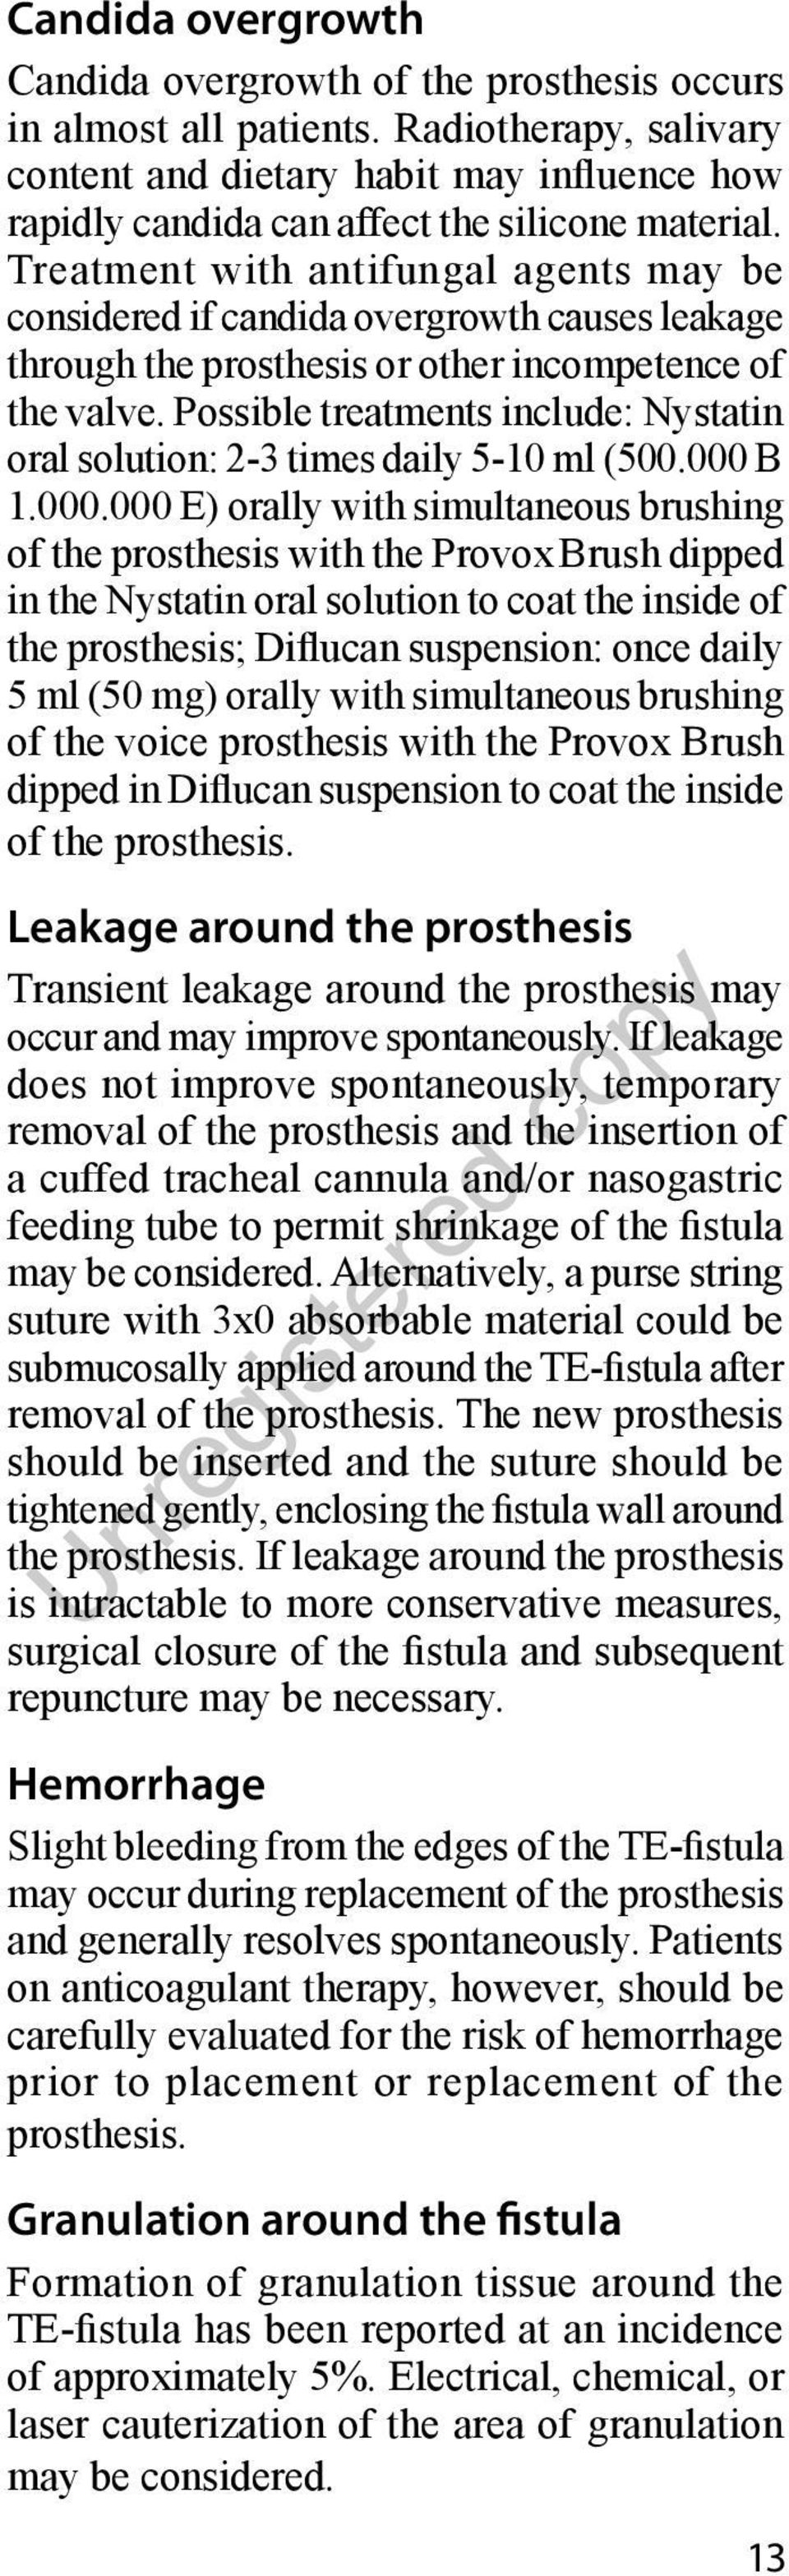 Treatment with antifungal agents may be considered if candida overgrowth causes leakage through the prosthesis or other incompetence of the valve.